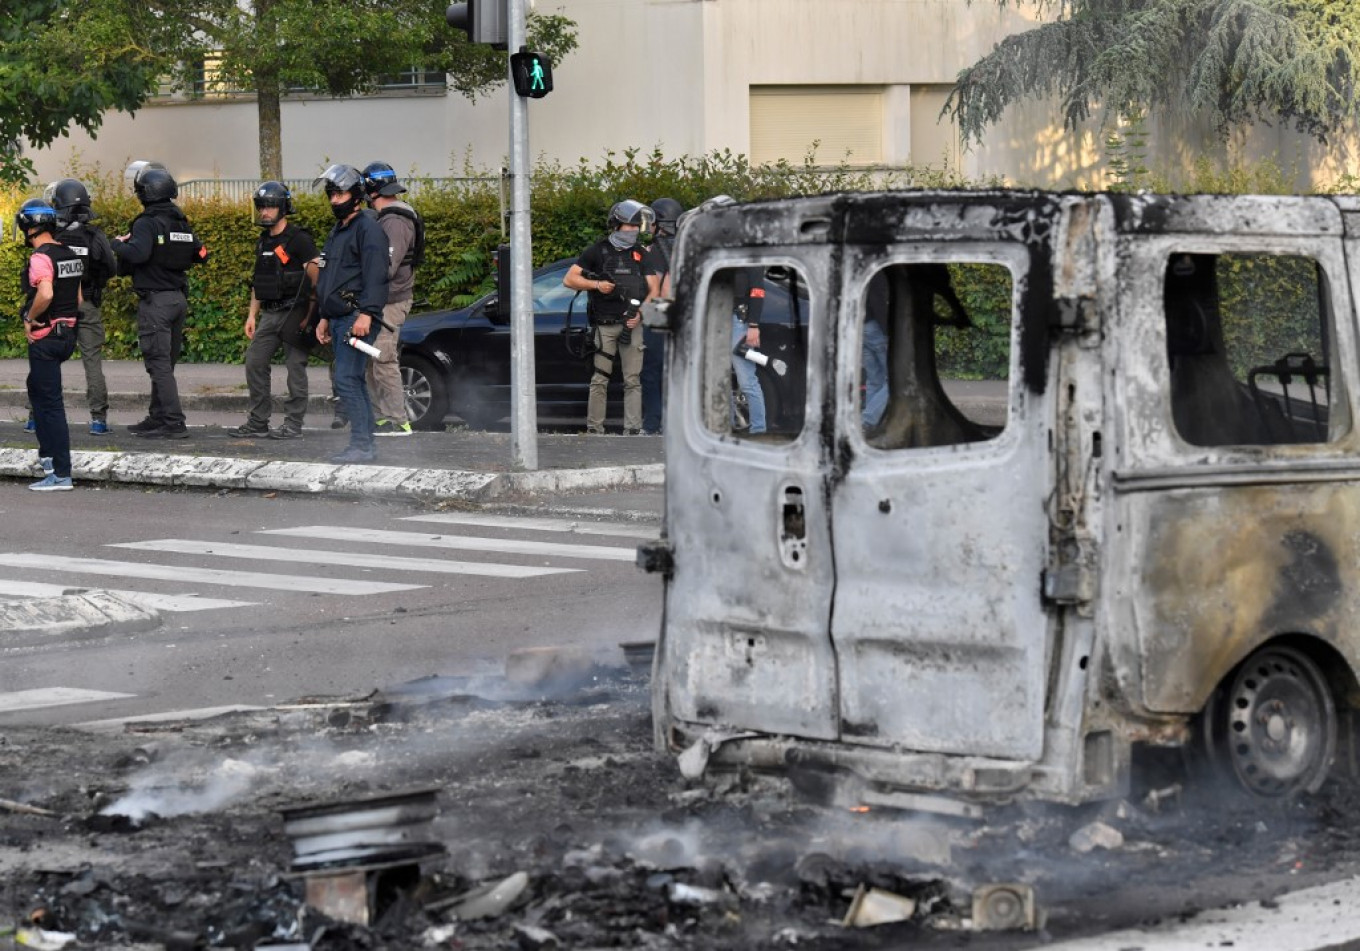 4 Suspects Face Charges in Dijon Ethnic Unrest Blamed on Chechens